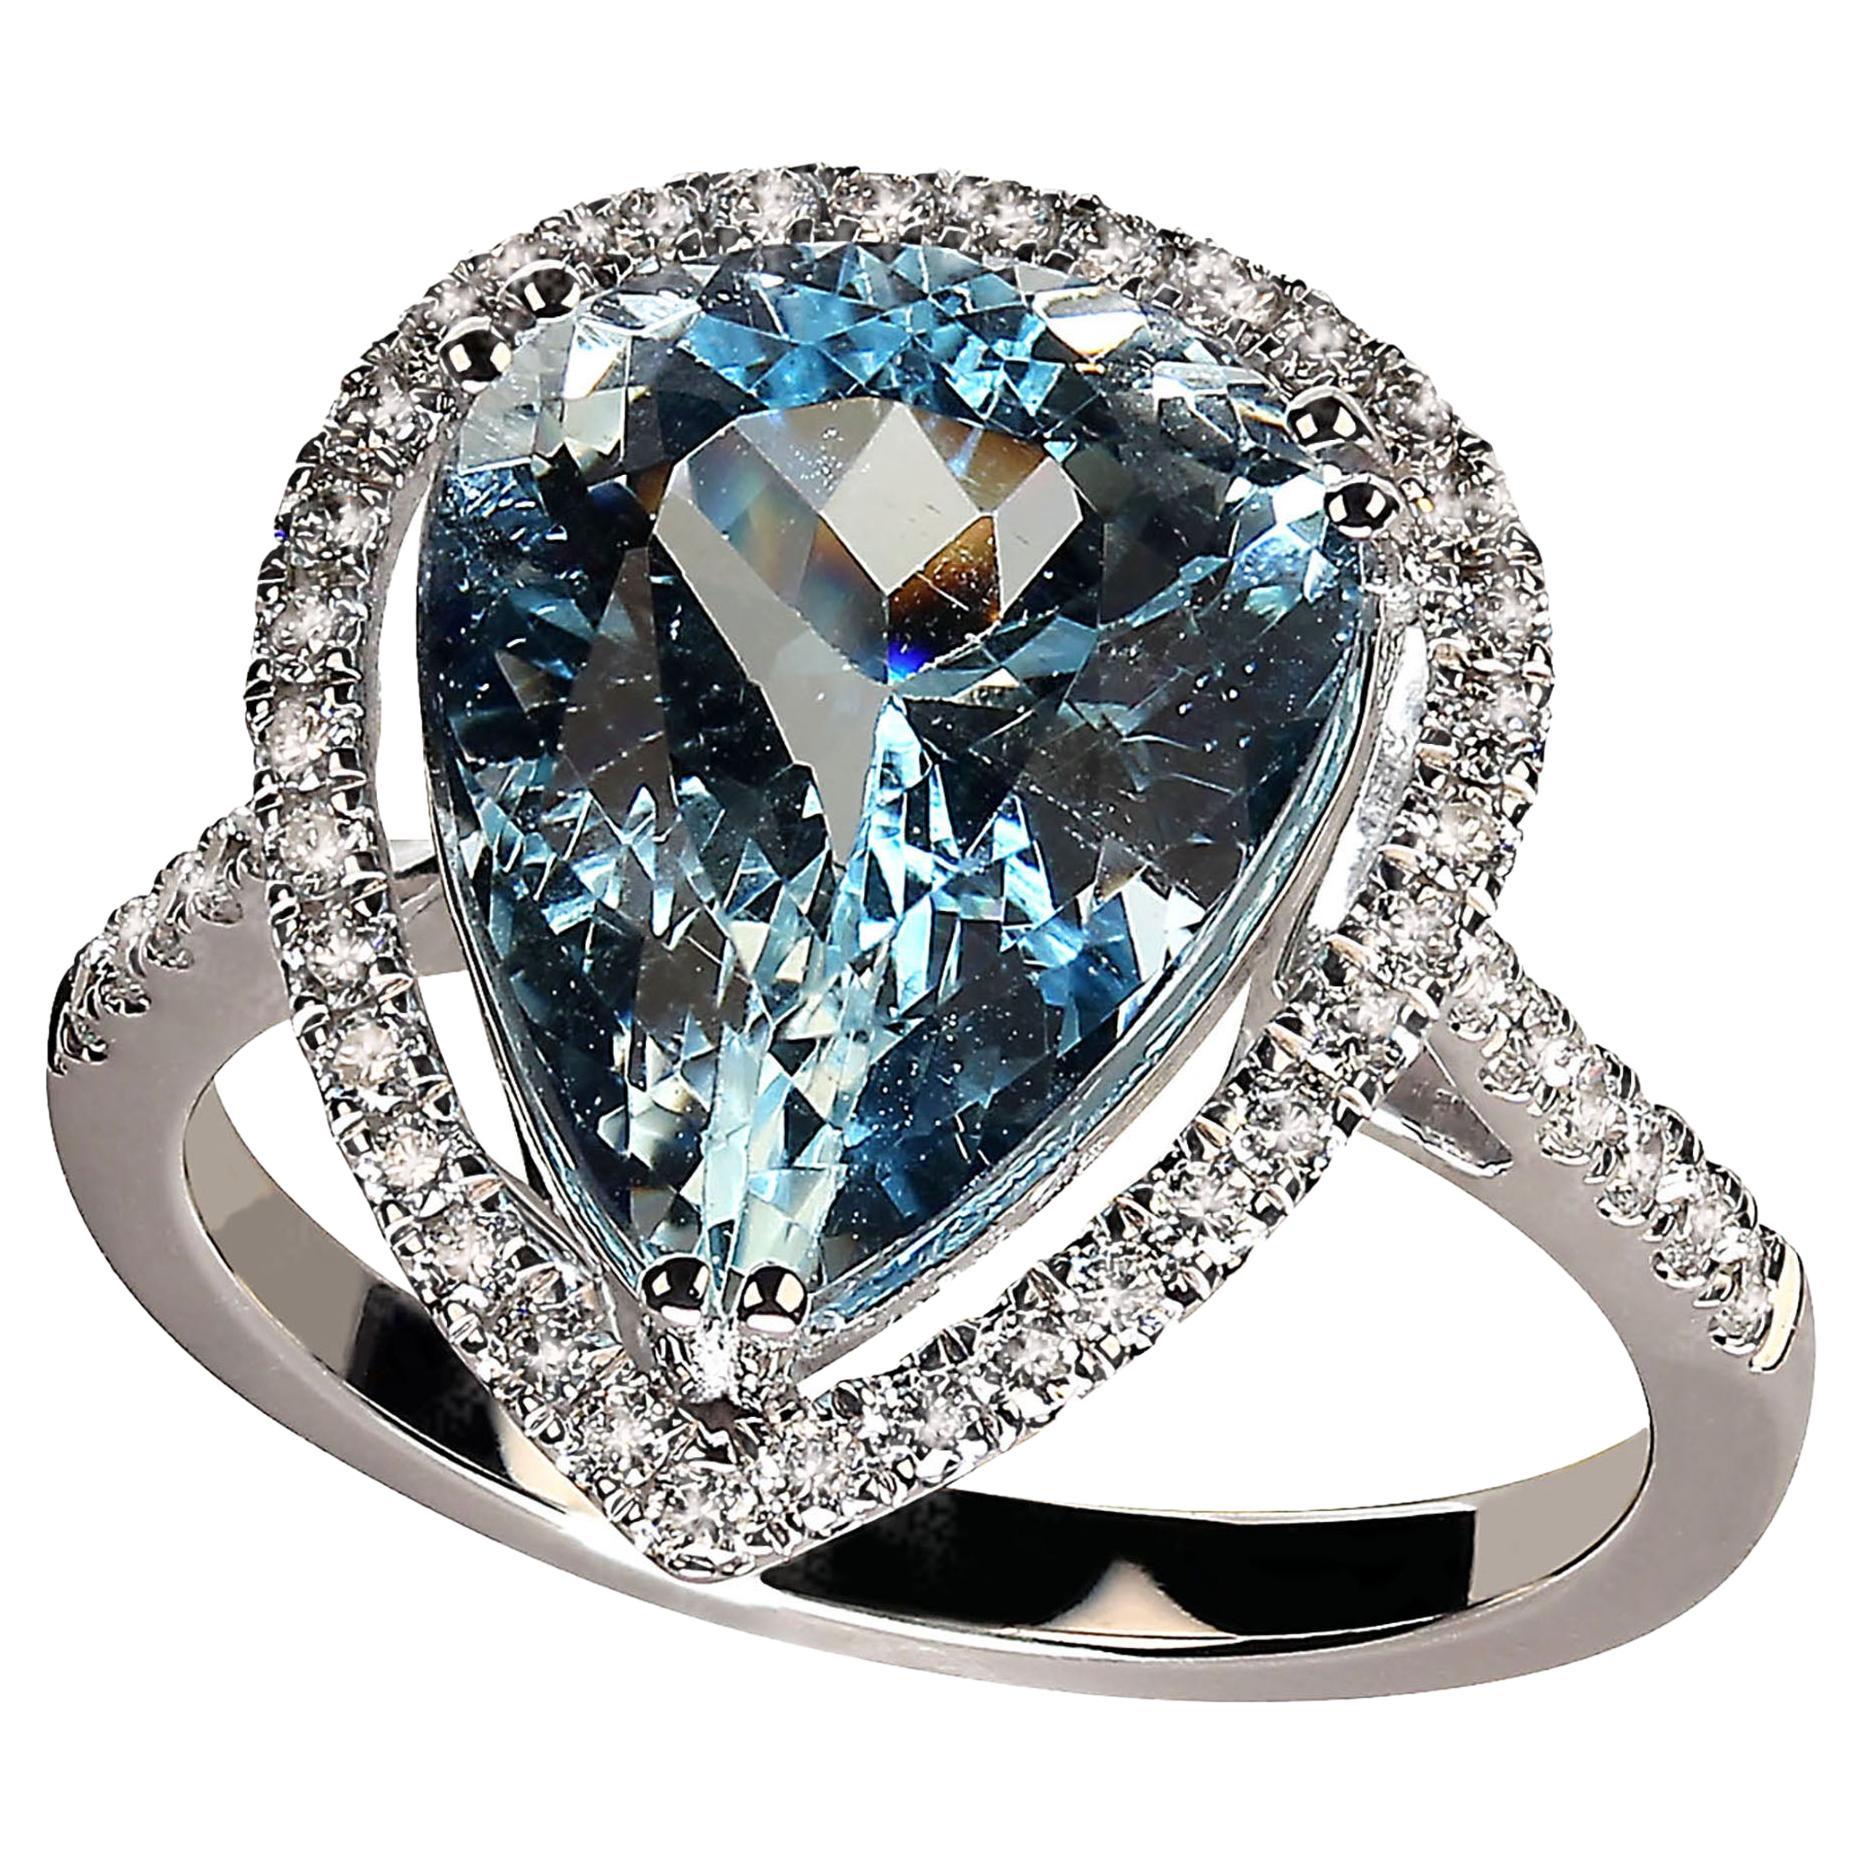 Glittering pear shape, 5.32ct Aquamarine in Diamond halo ring.  This one of a kind ring is breathtaking. It sparkles and dances on your finger.  The delicate Diamond halo enhances the beautiful blue Aquamarine and  Diamonds continue sparkling all